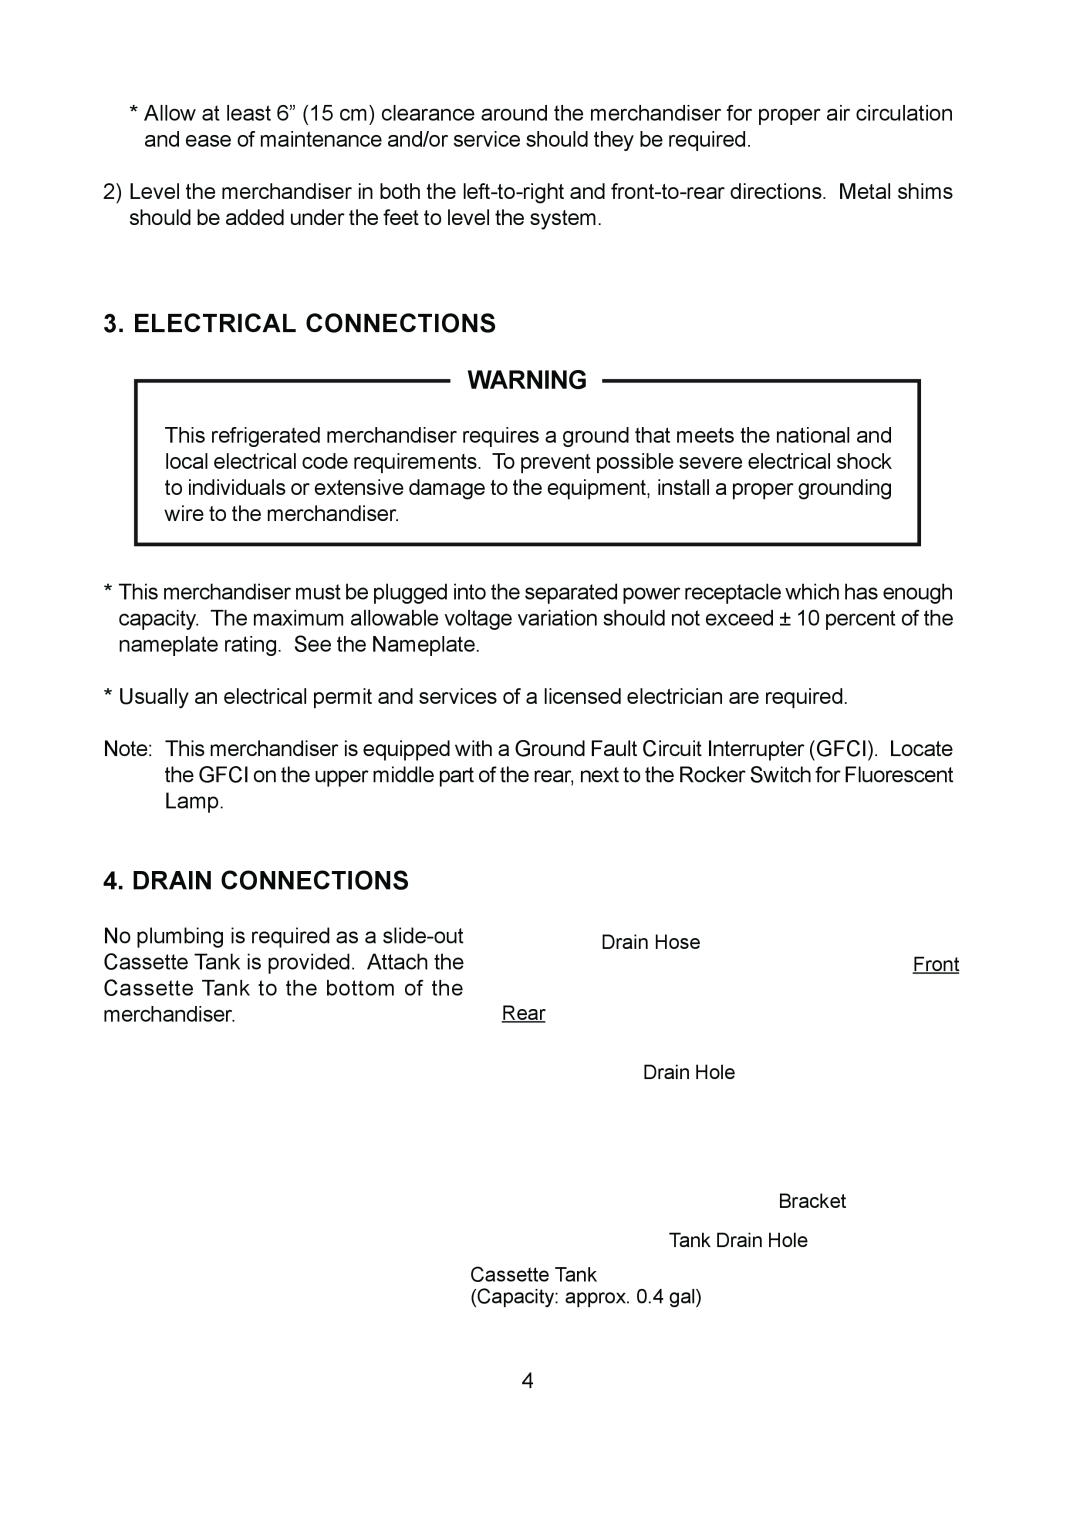 Hoshizaki KD-90D instruction manual Electrical Connections, Drain Connections 